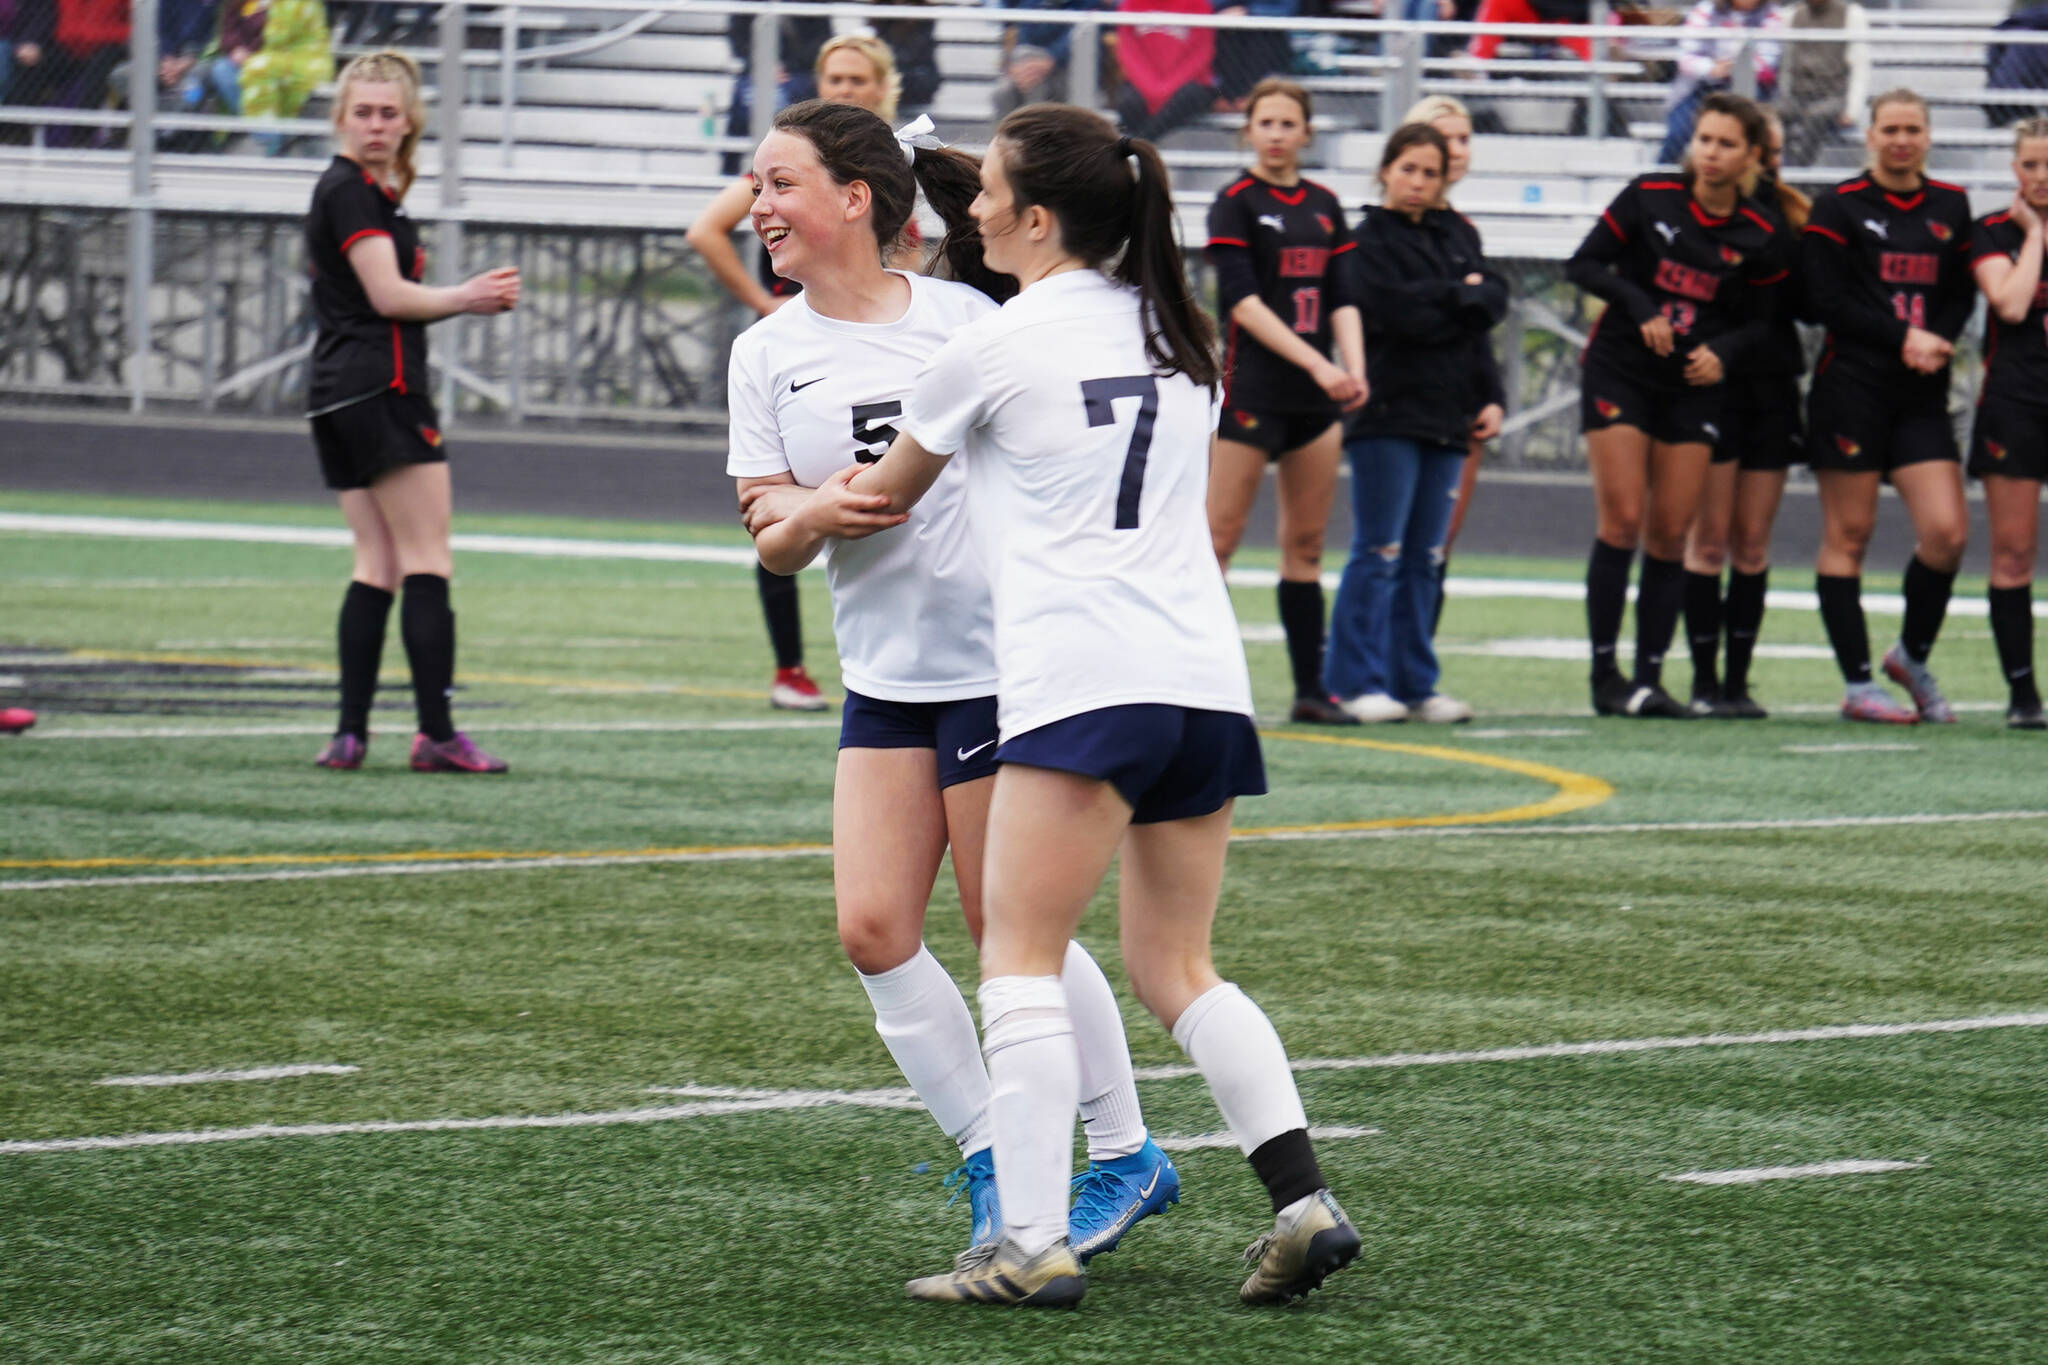 Soldotna’s Piper Bloom celebrates with Bay Bloom after Bay scored a goal during the Division II Soccer State Championship on Saturday, May 27, 2023, at West Anchorage High School in Anchorage, Alaska. (Jake Dye/Peninsula Clarion)